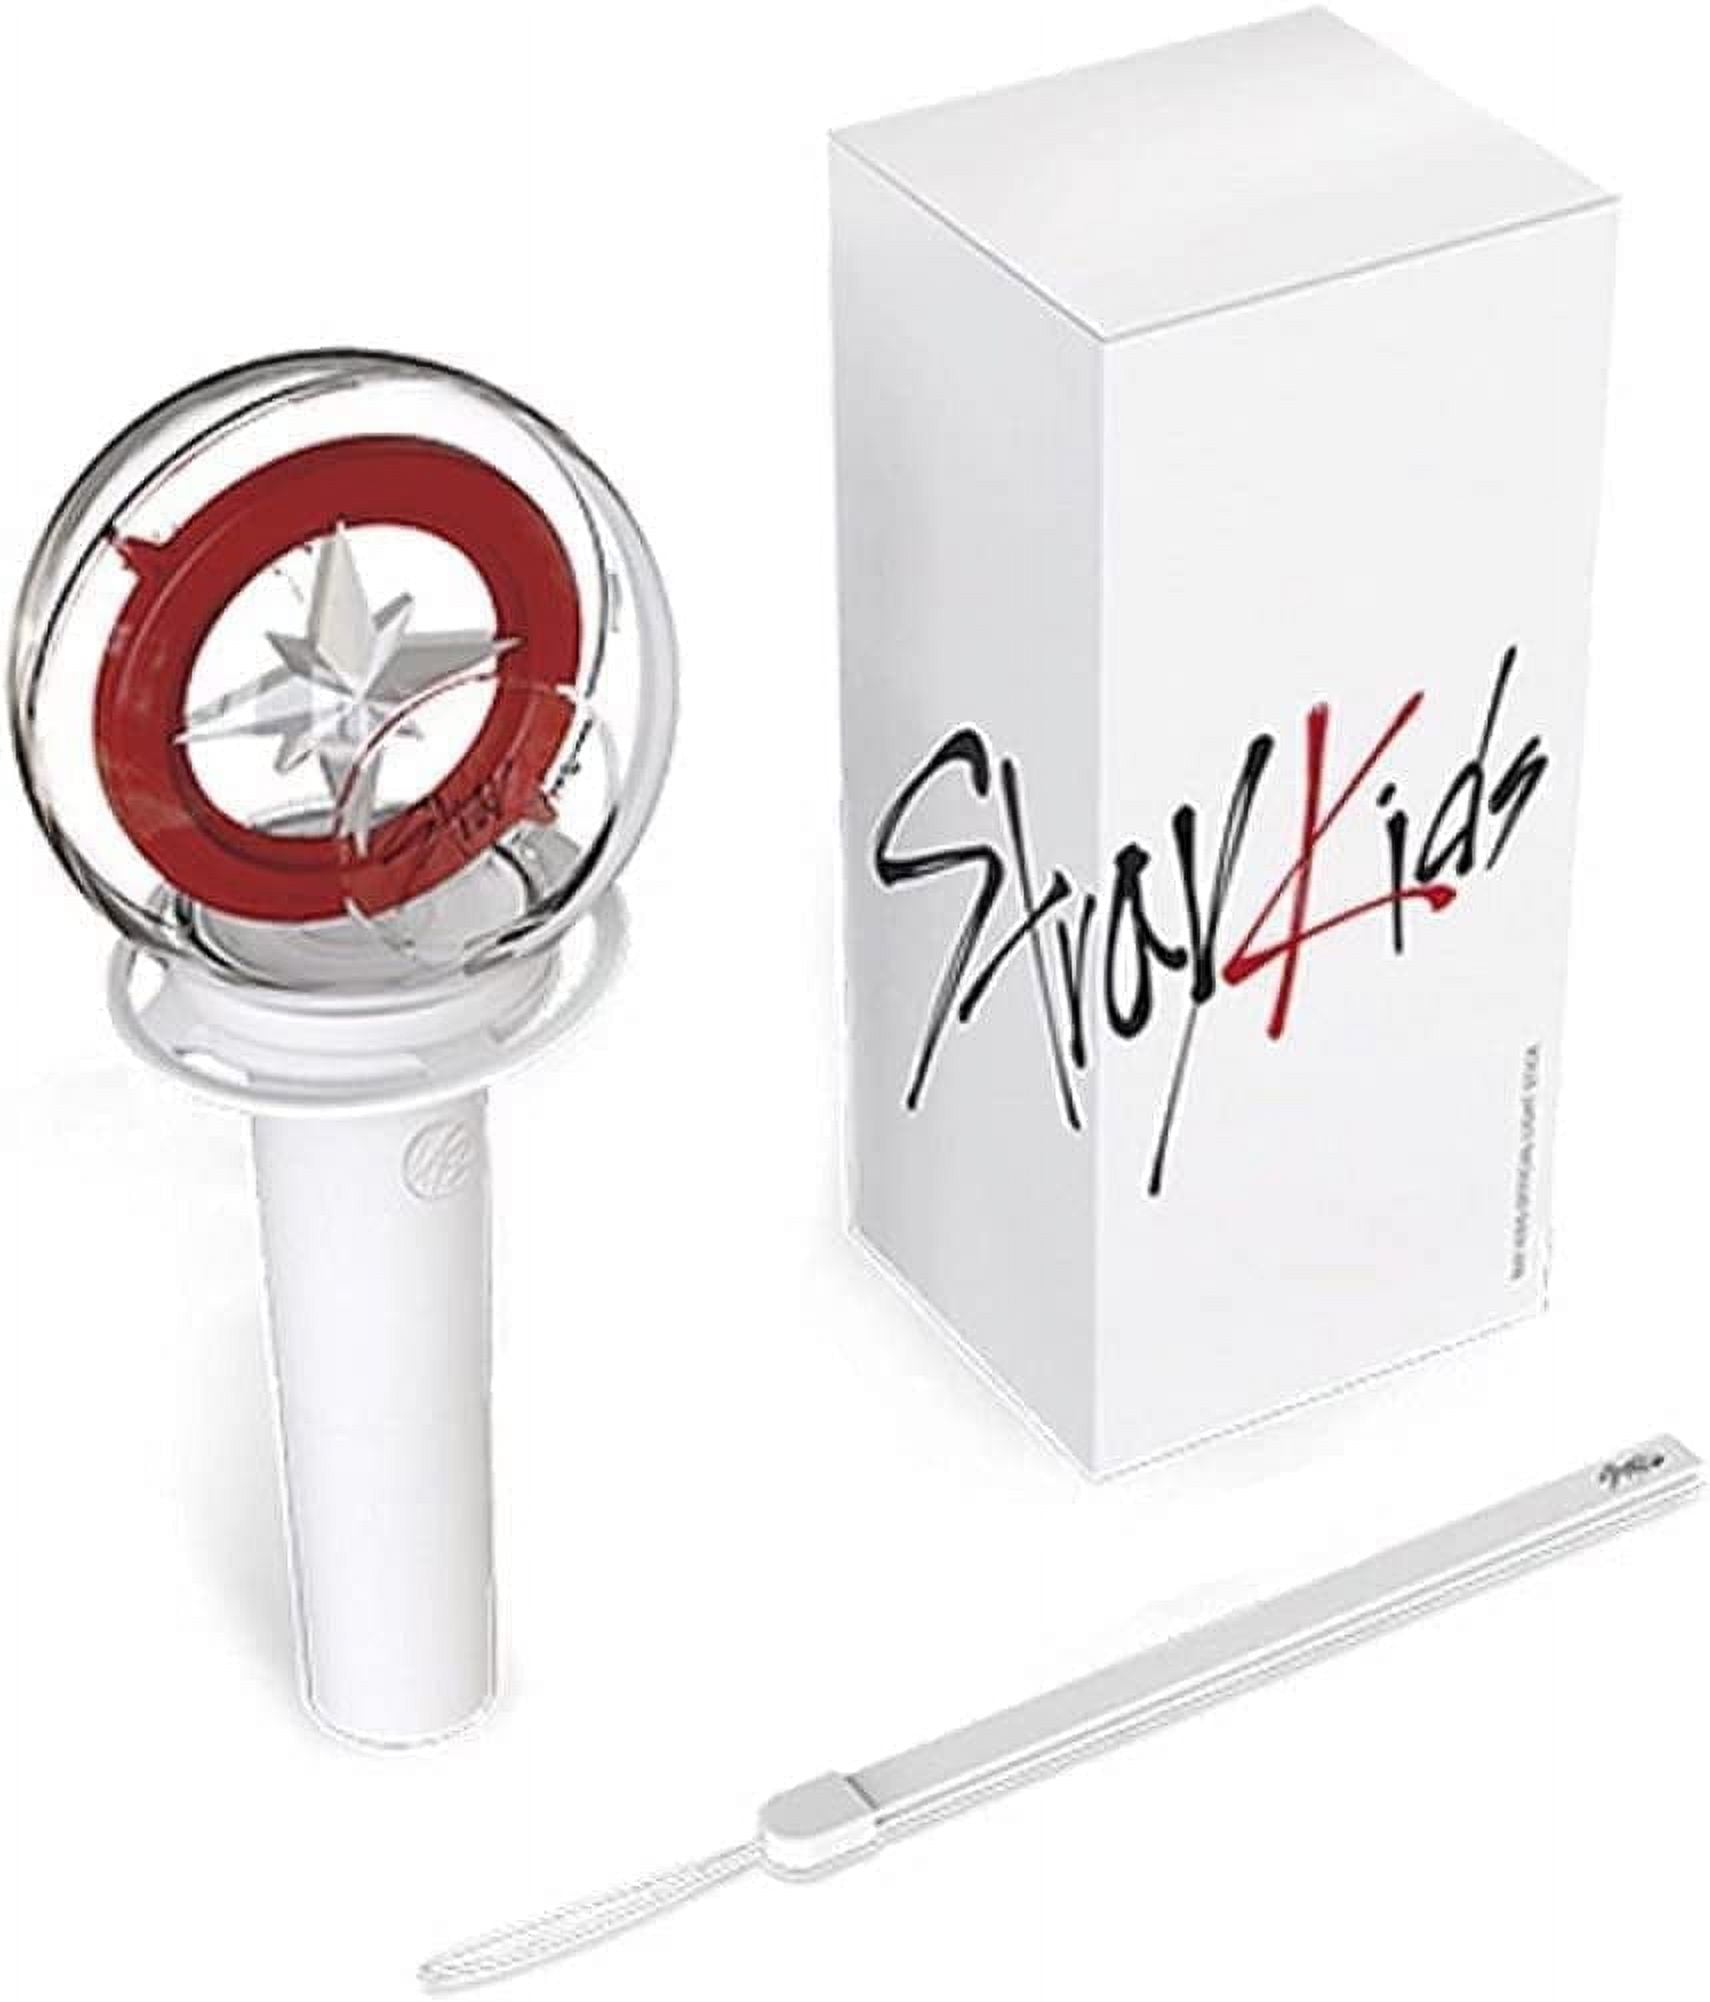 NEW STRAY KIDS LIGHT STICK ALERT ‼️ I cant believe we are getting